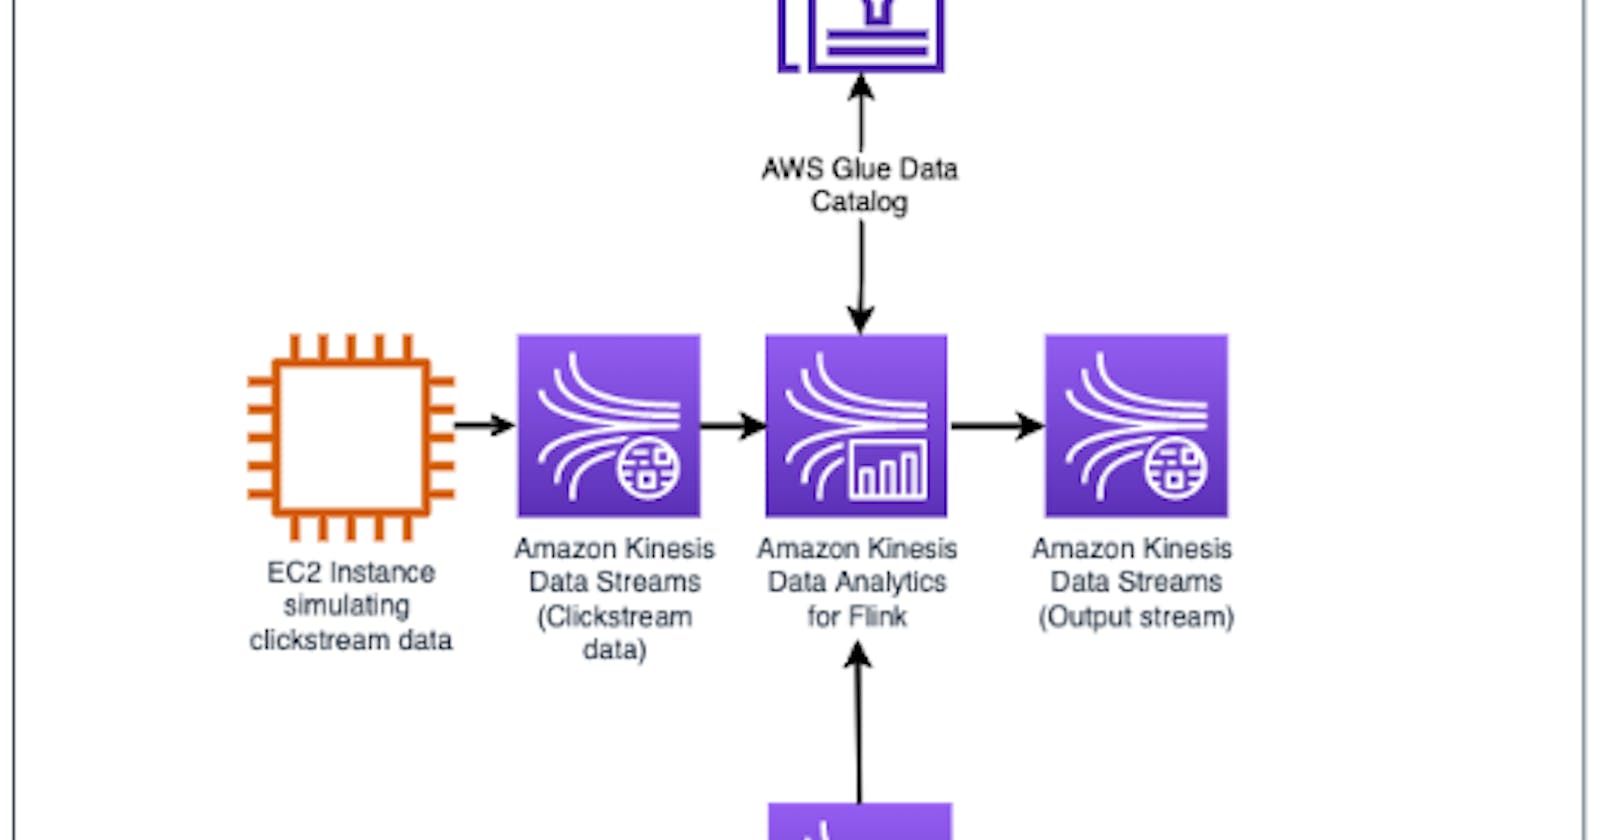 Building Streaming Data Analytics Pipeline using Amazon Kinesis Data Streams (with Apache Flink and Zeppelin notebook)